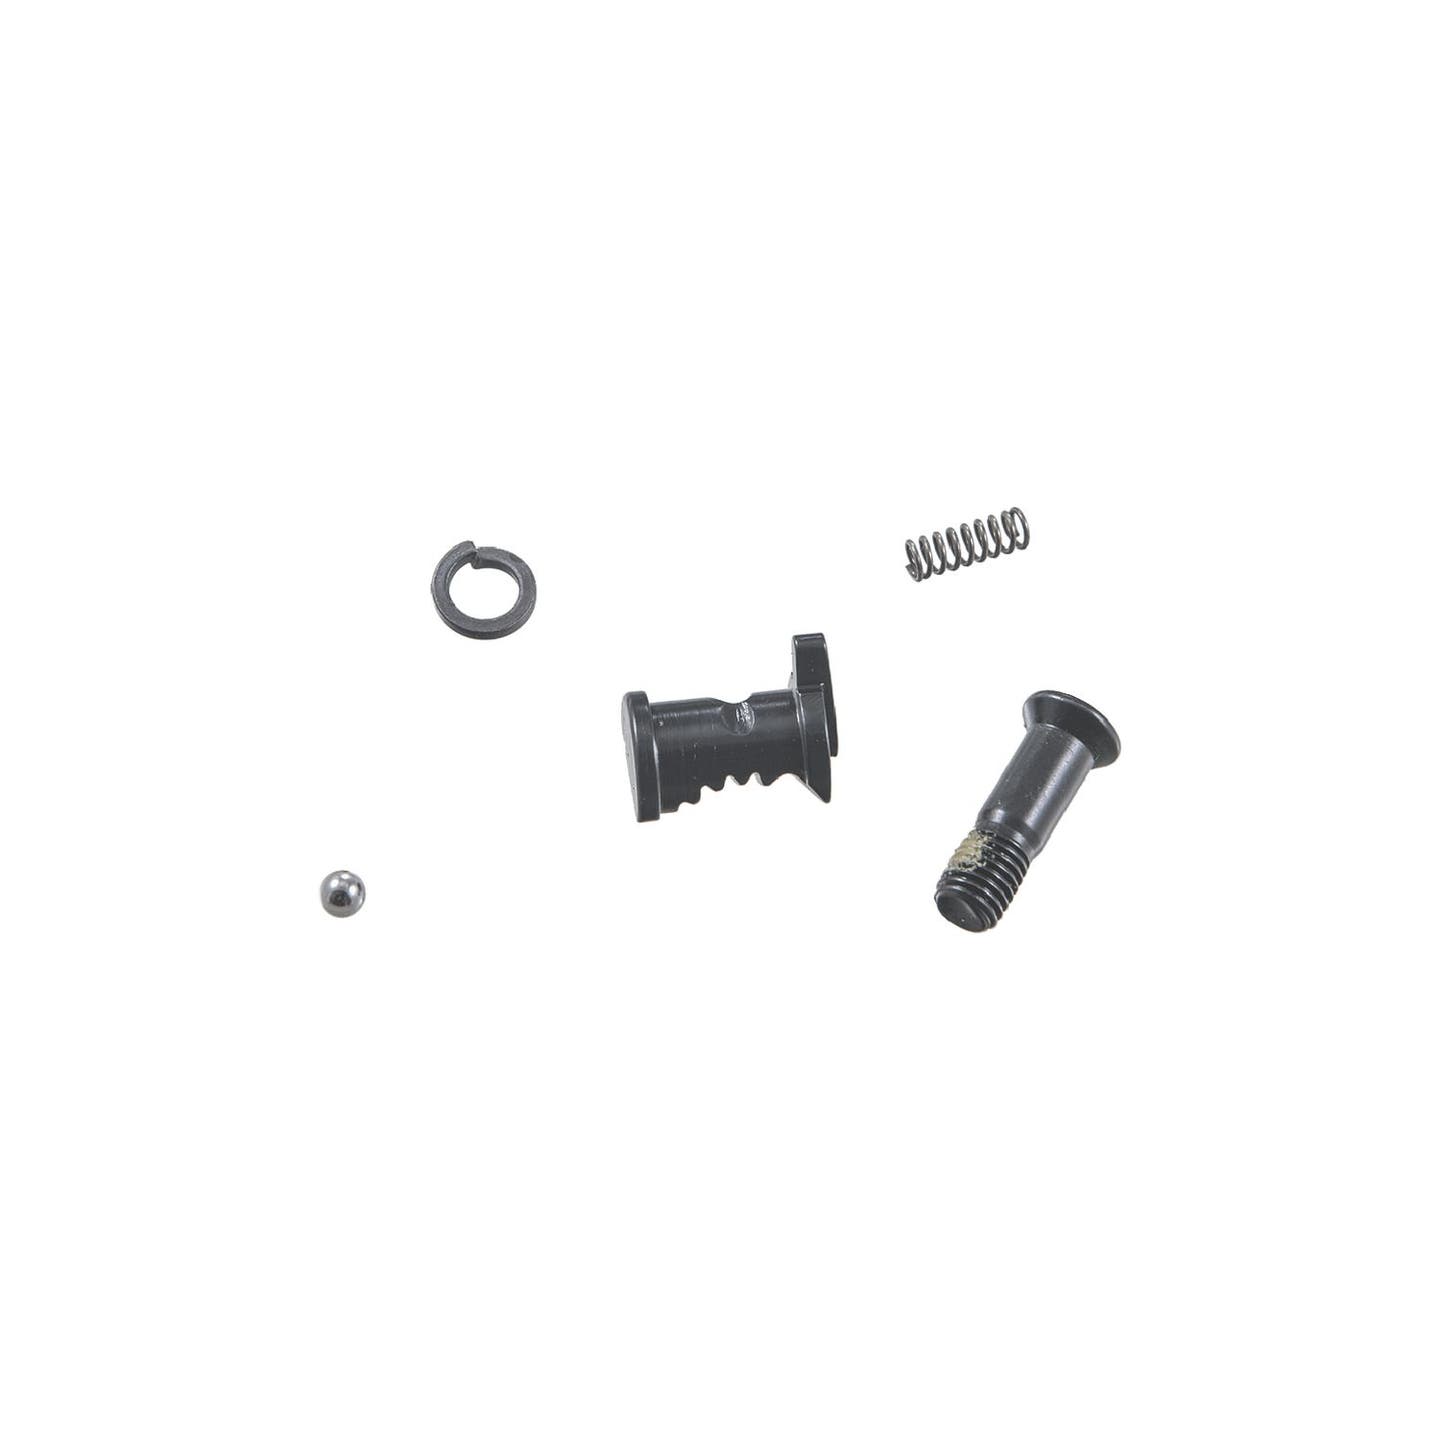 3/8" DRIVE 60 TOOTH AND EIGHTY8 TOOTH LOCKING FLEX JOINT KIT